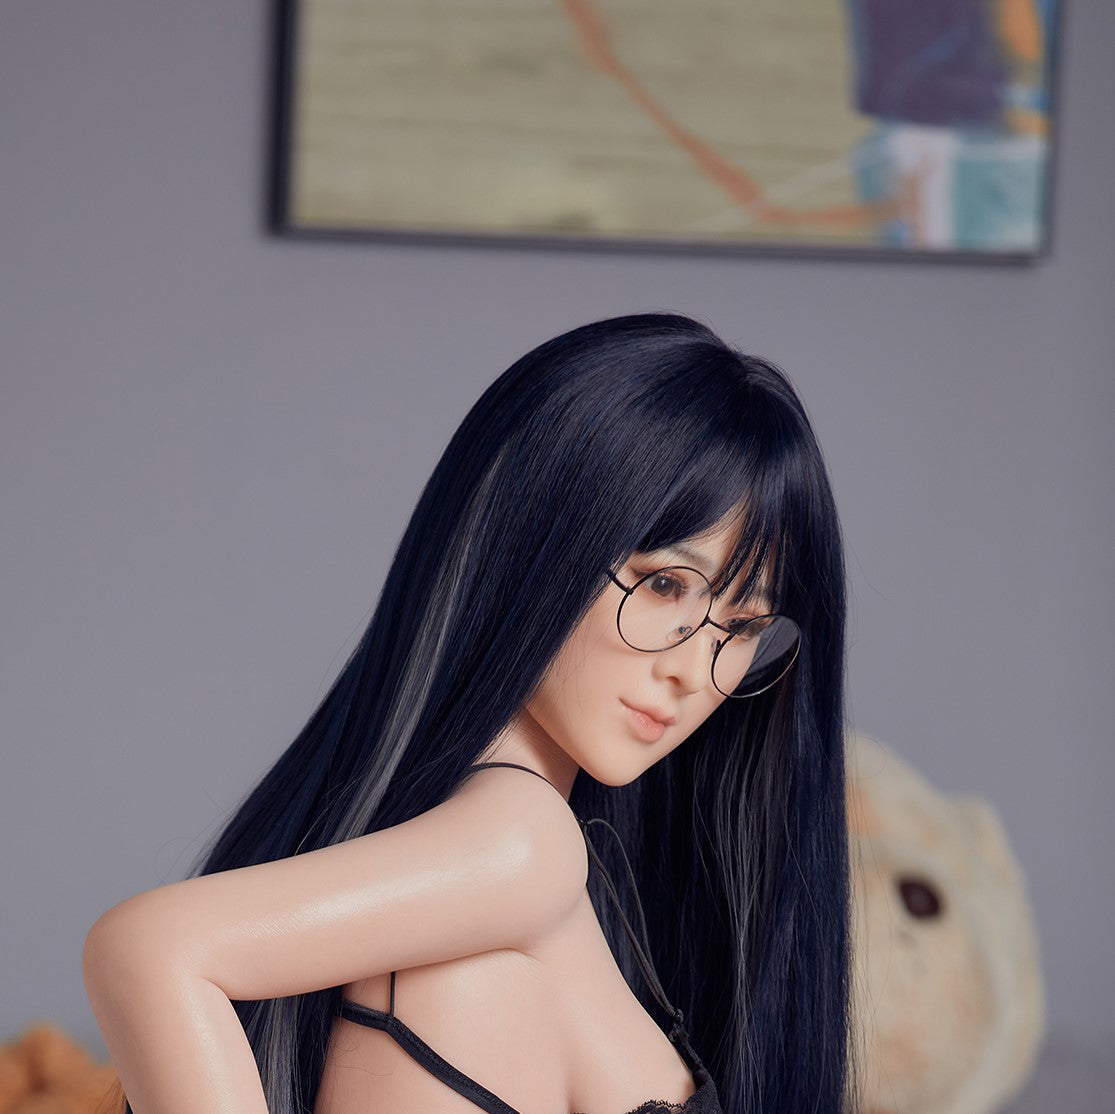 CST Doll - Riley - Sex Doll Head - Natural